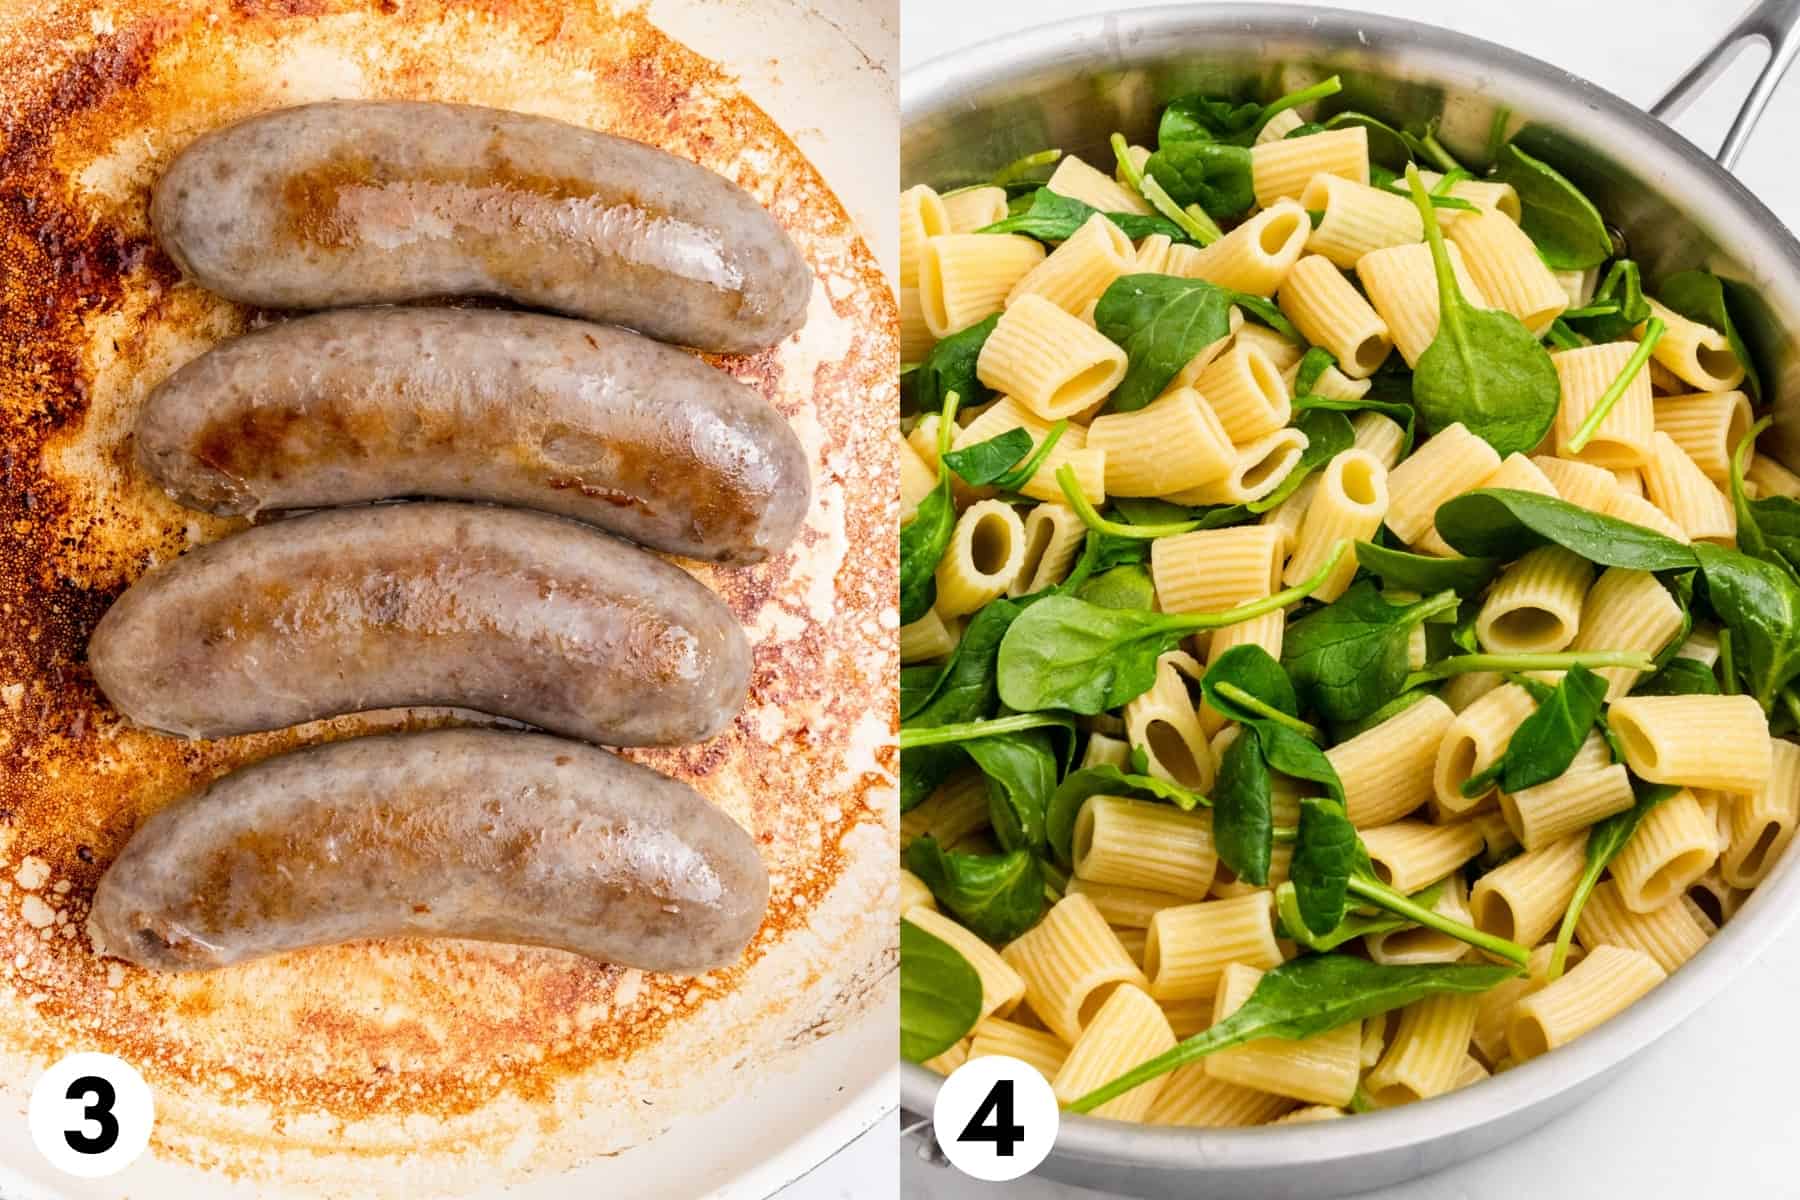 Italian sausages cooked in skillet and pasta in separate skillet with spinach.